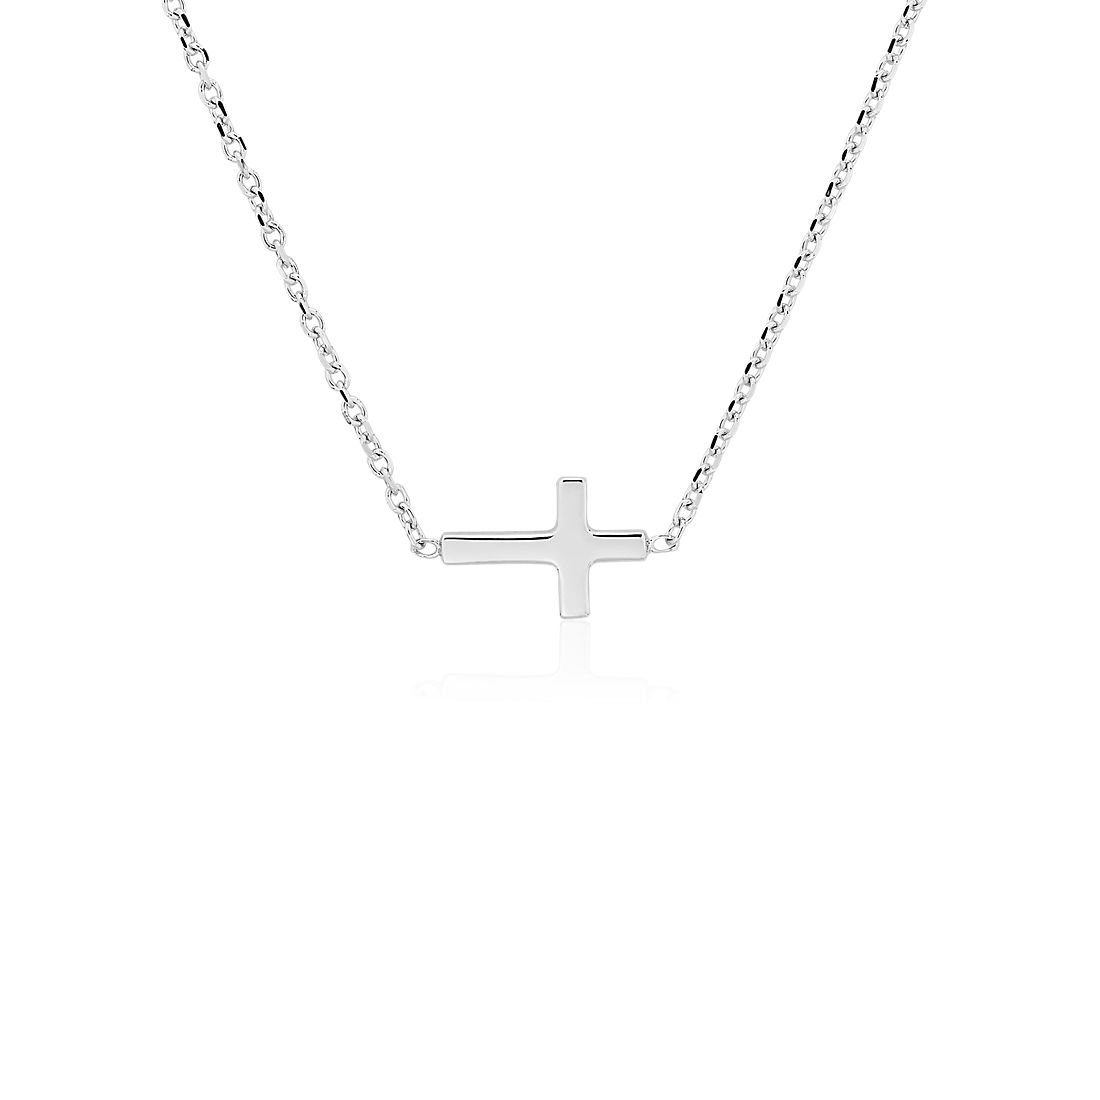 14k White Gold Mini Contemporary Cut-out Cross Necklace Chain 18 Inches